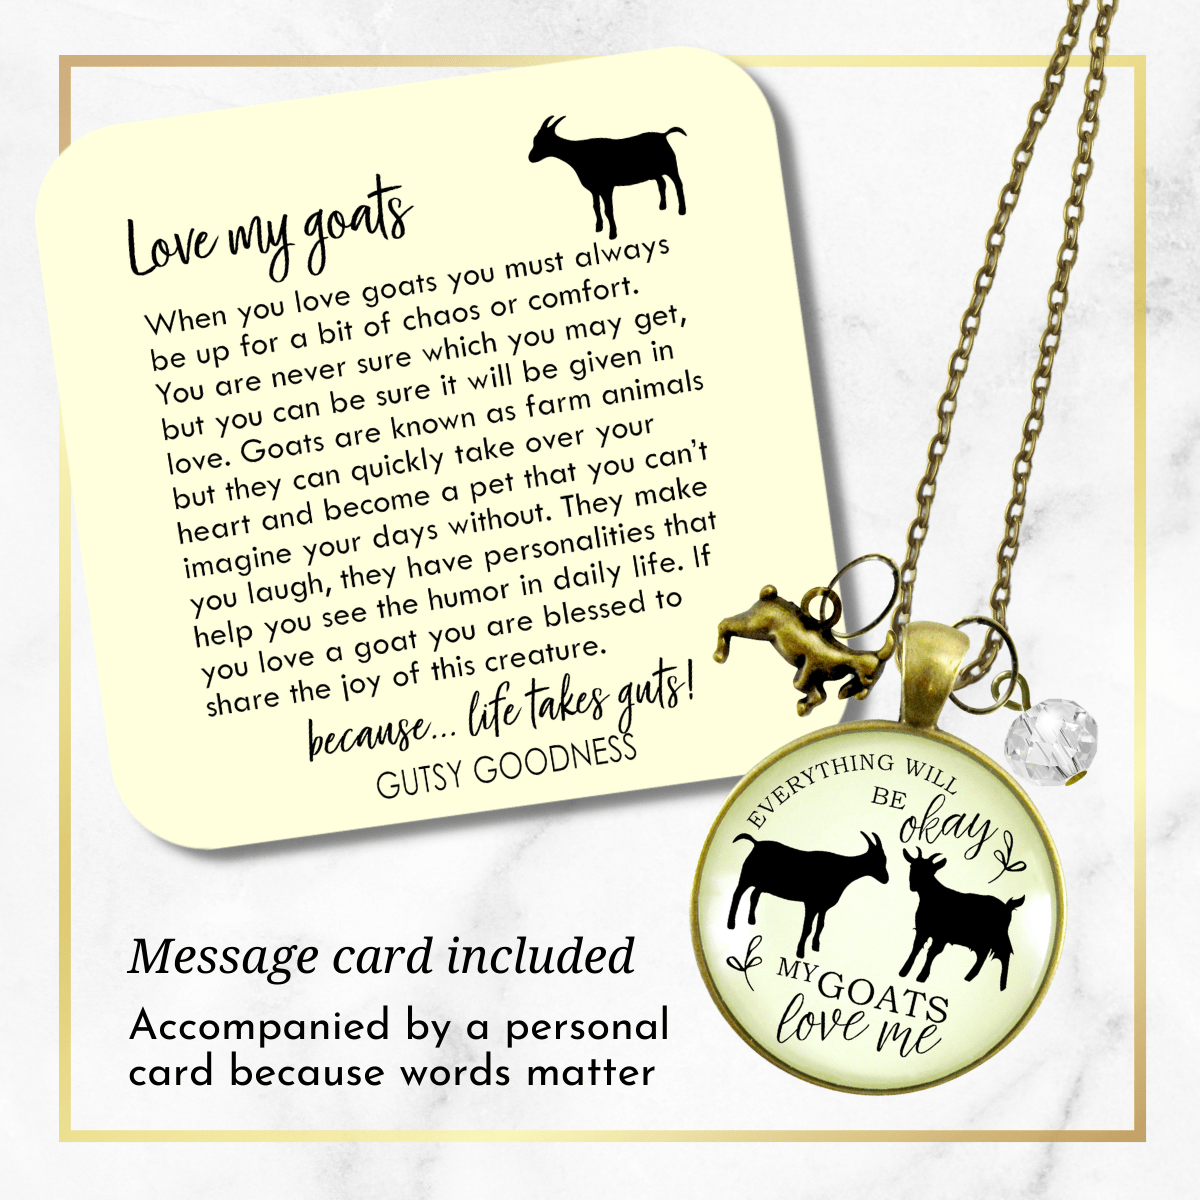 Gutsy Goodness Goats Necklace All is Okay My Goats Love Me Farm Inspired Jewelry 36&quot; - Gutsy Goodness;Goats Necklace All Is Okay My Goats Love Me Farm Inspired Jewelry - Gutsy Goodness Handmade Jewelry Gifts